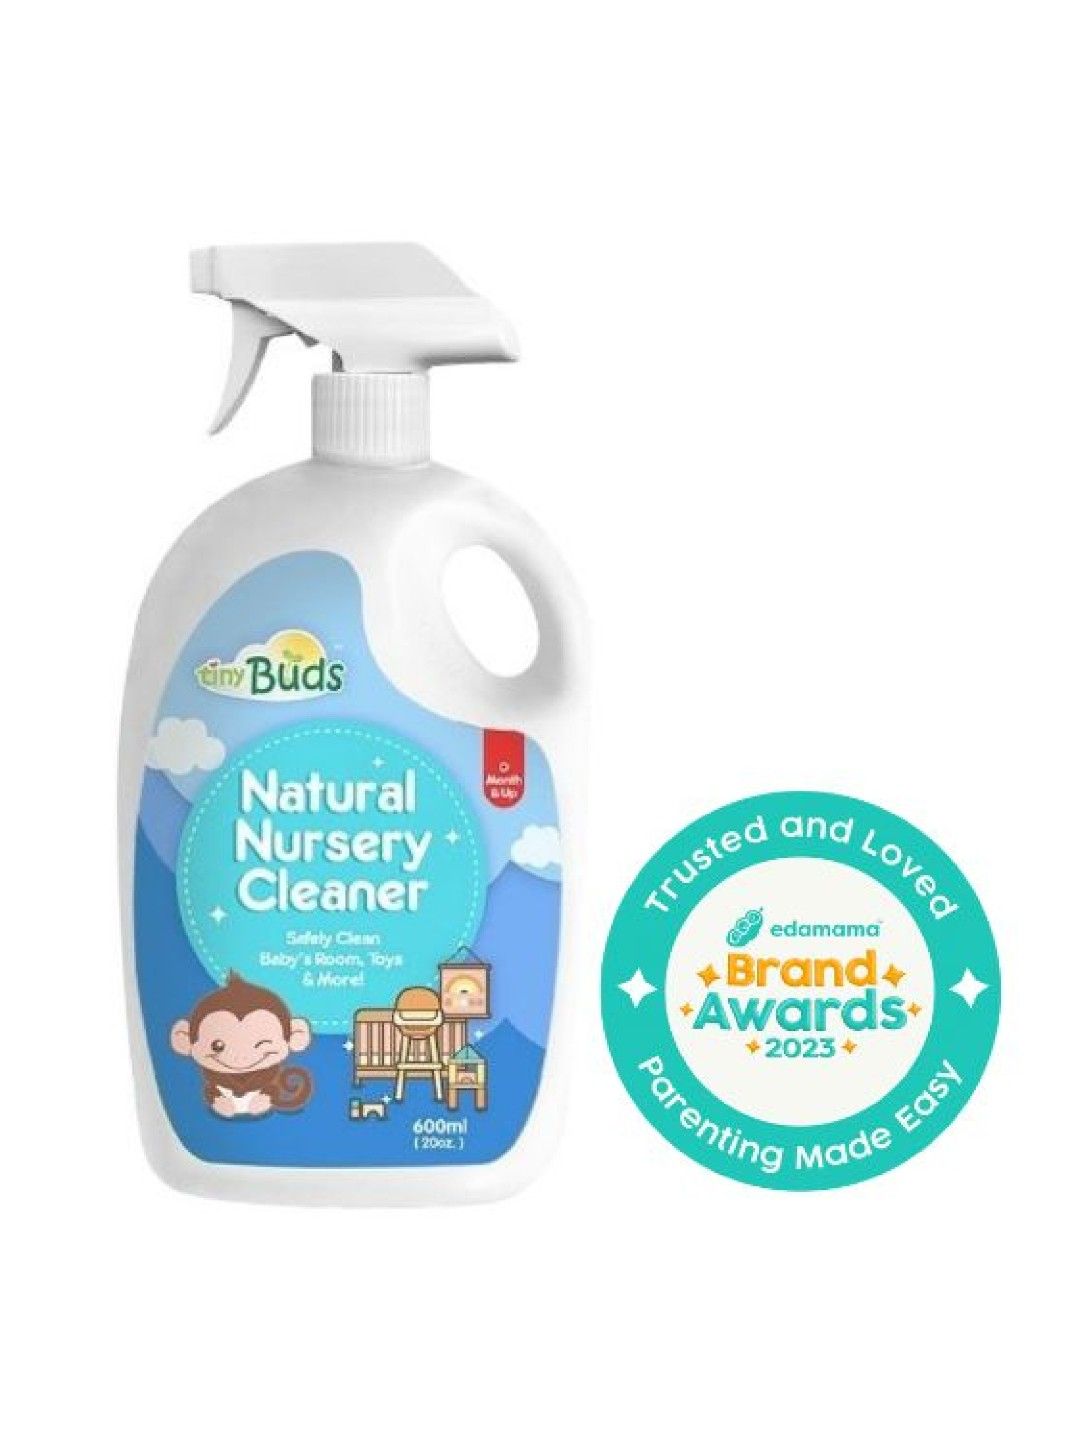 Tiny Buds Natural Nursery Cleaner Bottle (600ml)